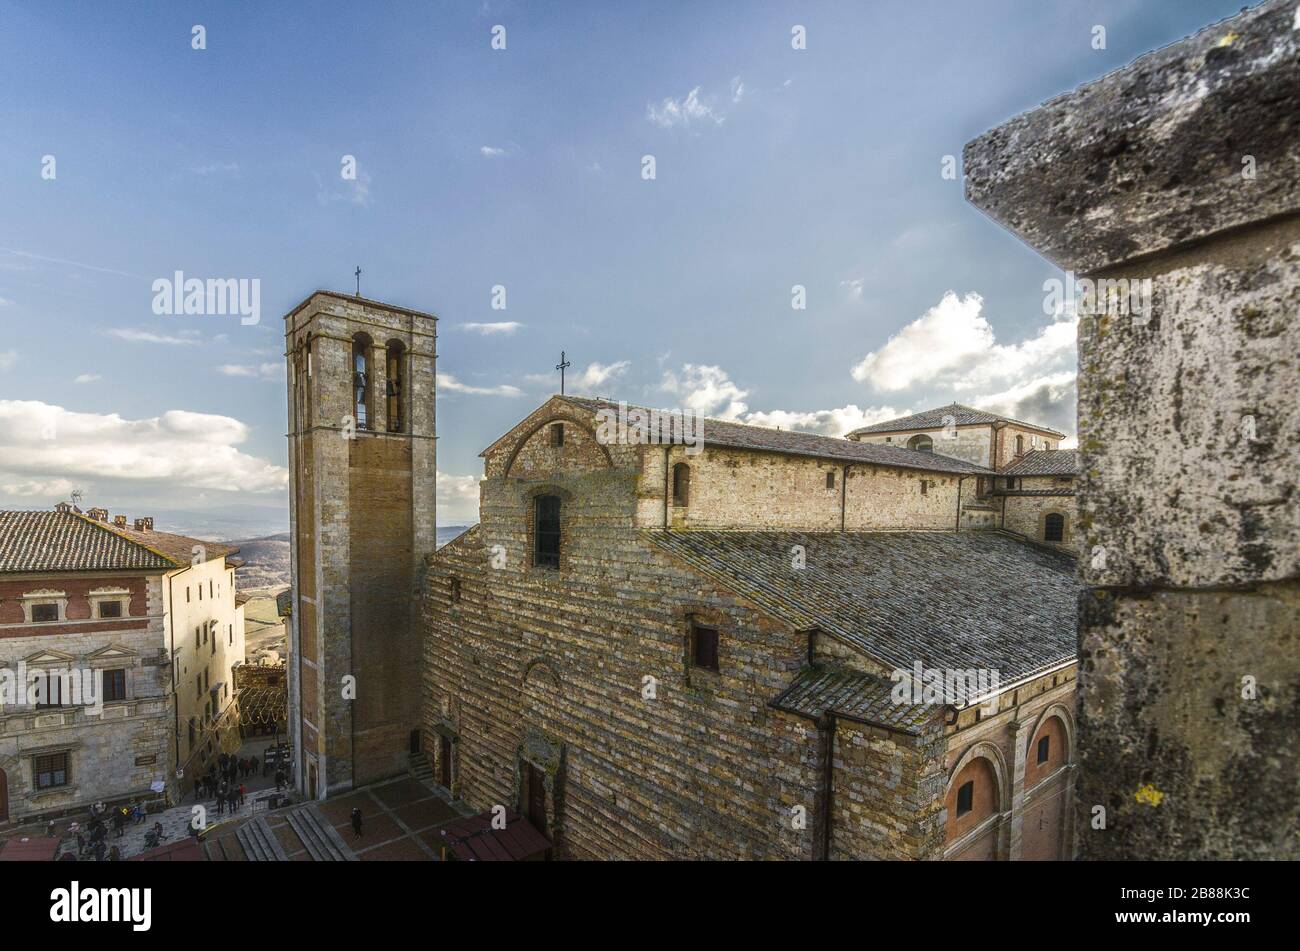 View of the Cathedral of Santa Maria Assunta in Montepulciano Stock Photo